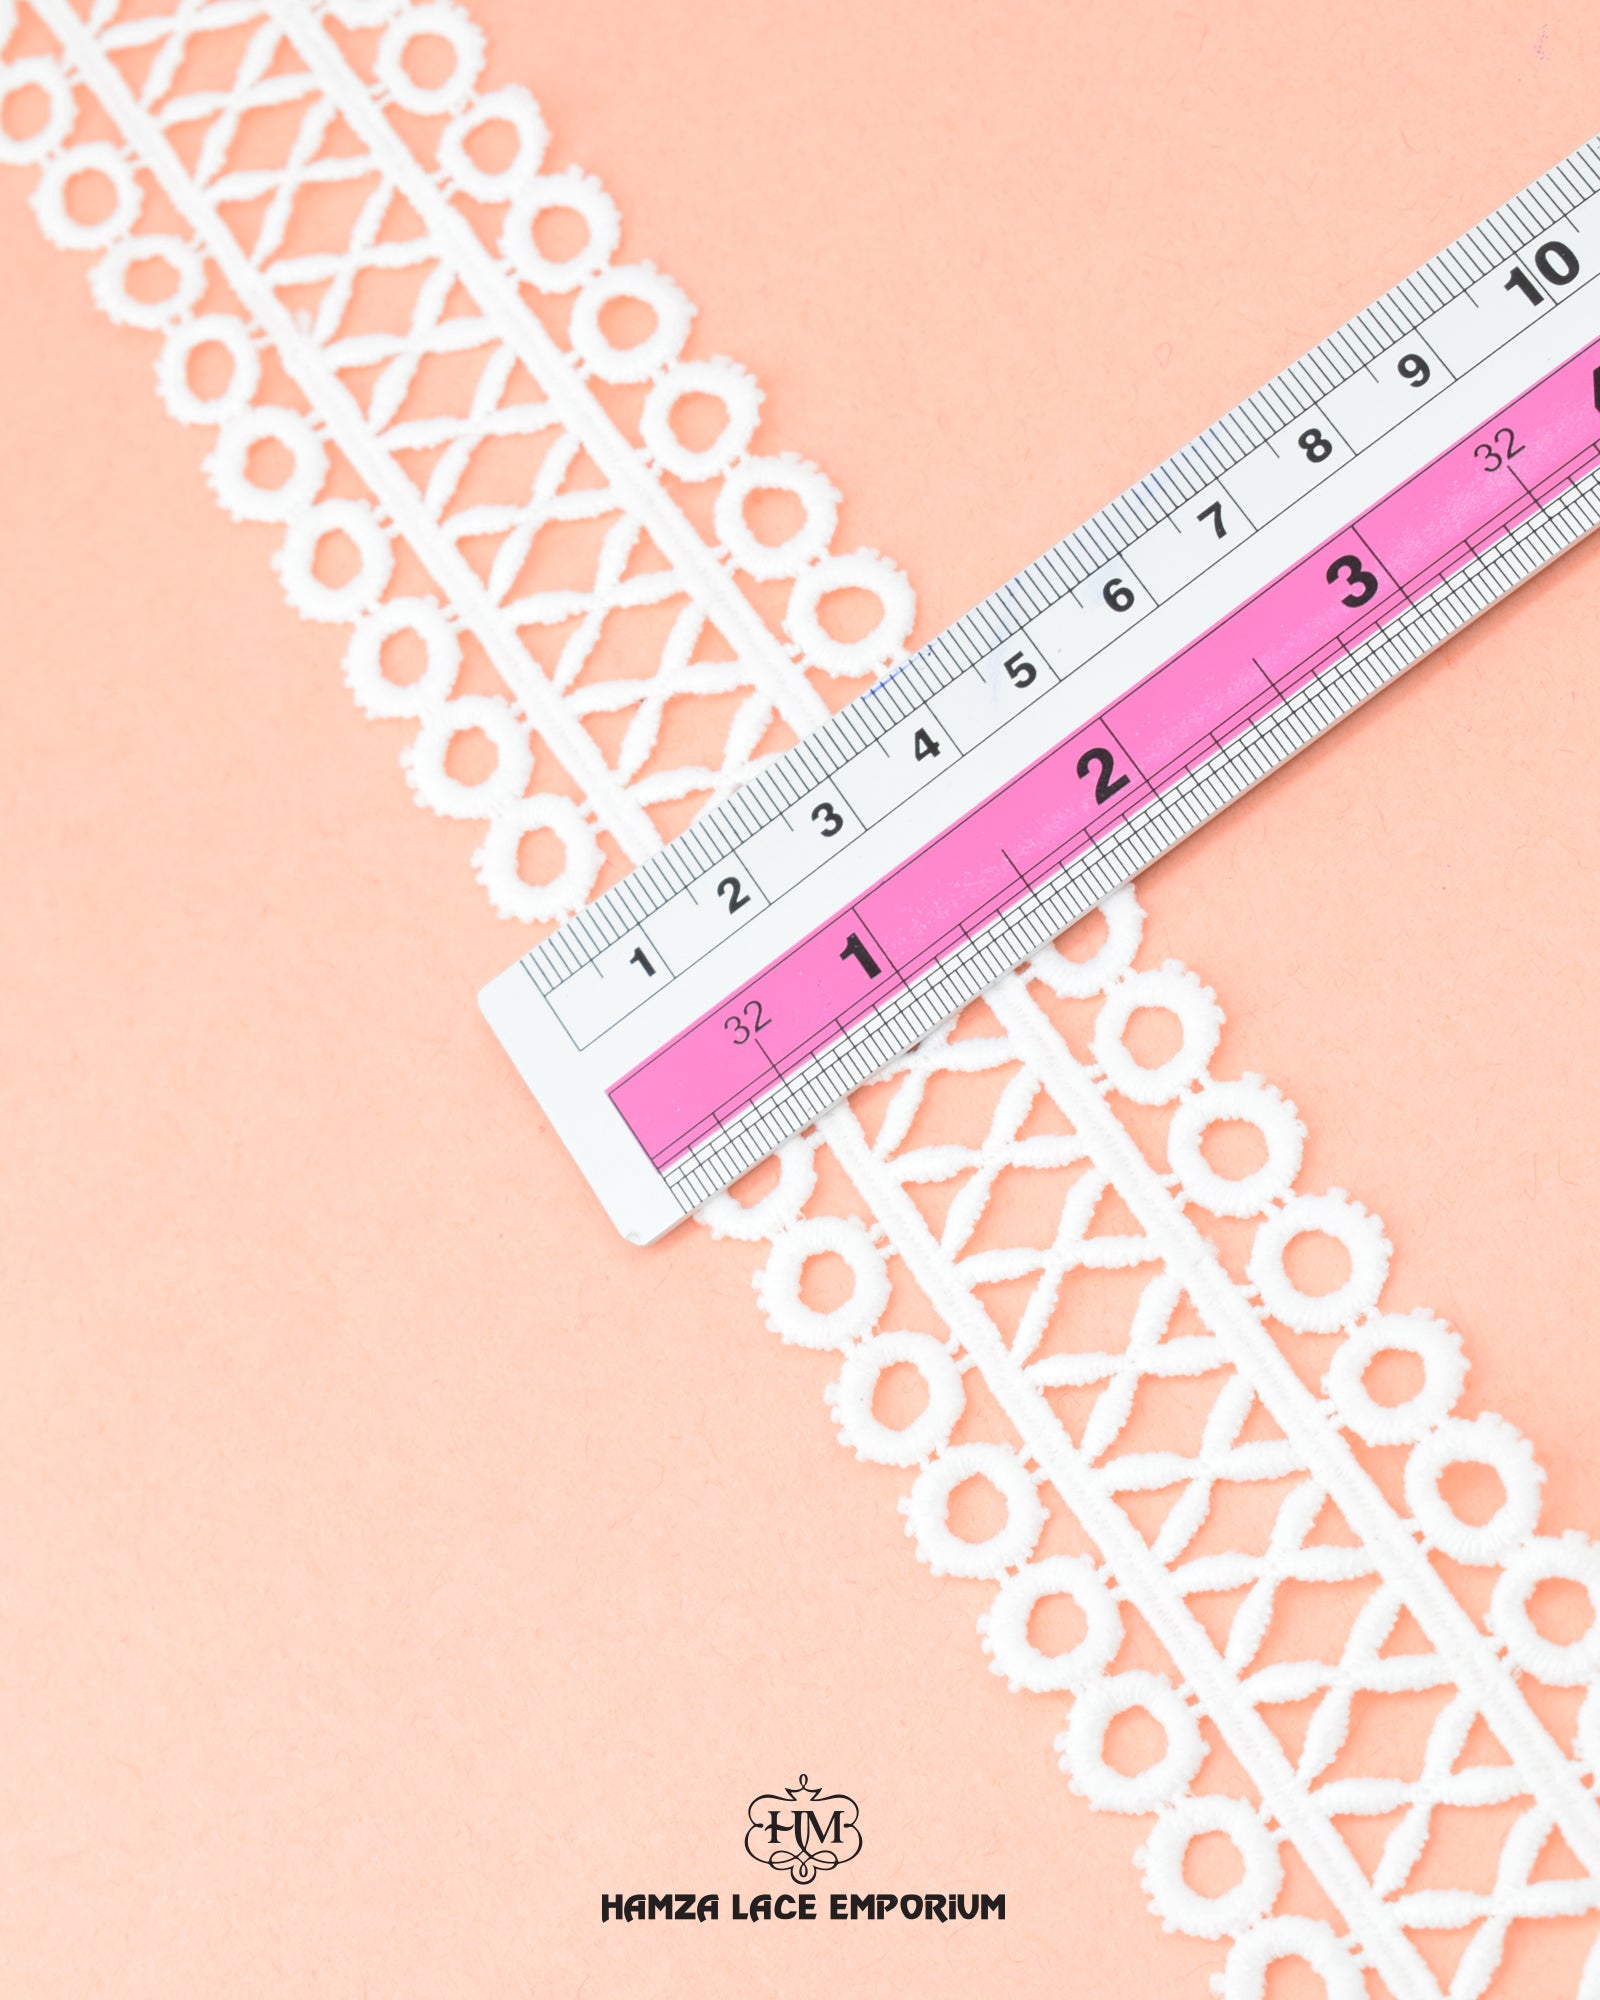 Size of the 'Center Filling Lace 22591' is shown with the help of a ruler as '2' inches